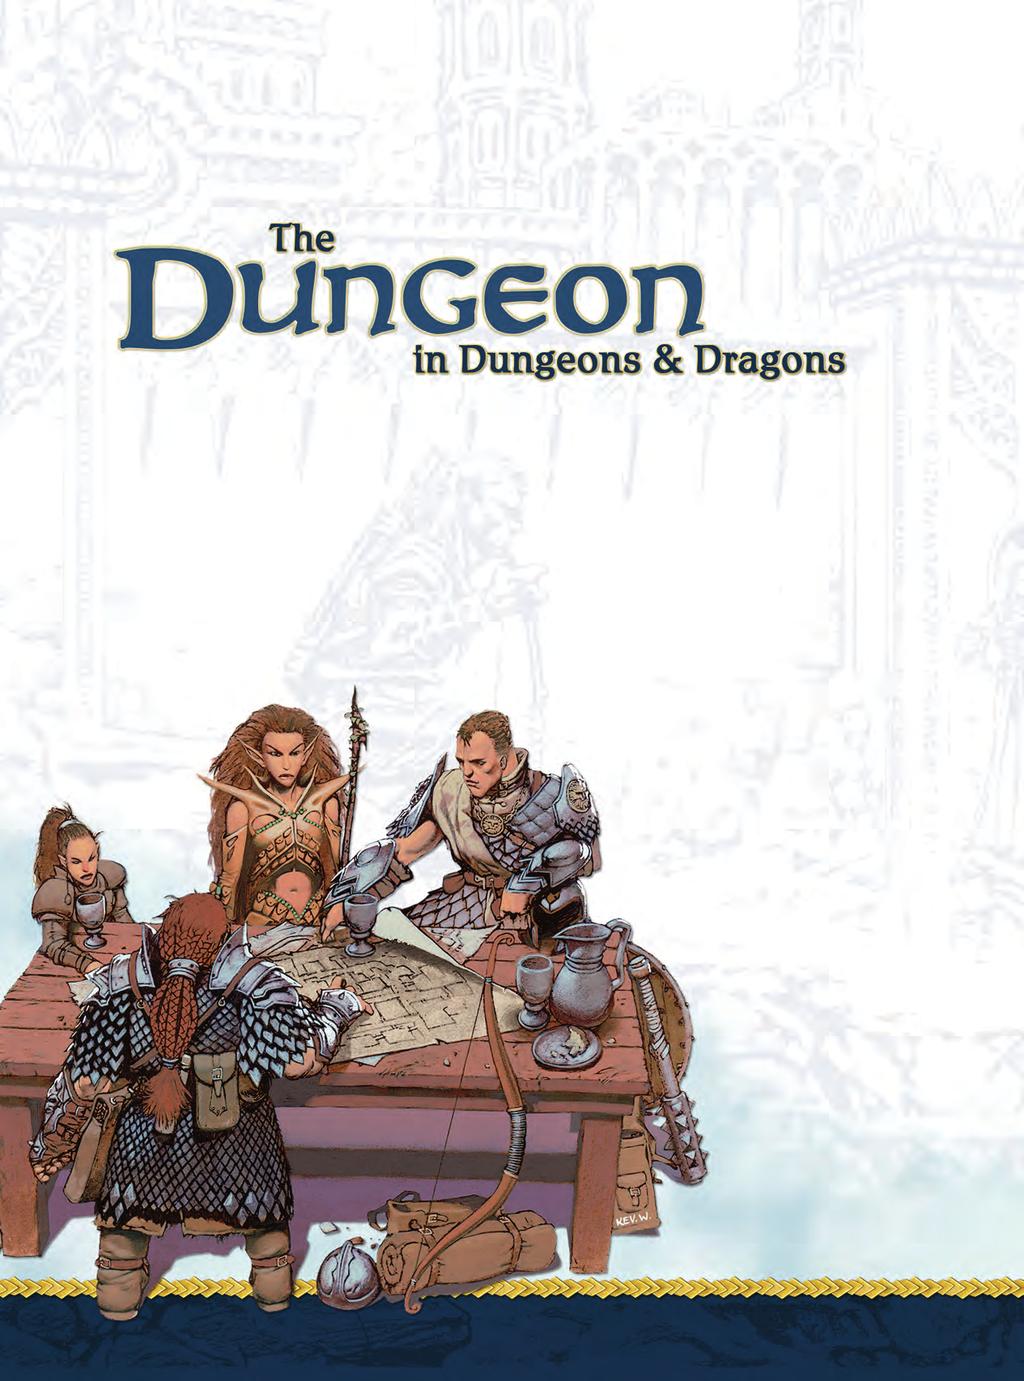 Dungeon, in the DUNGEONS & DRAGONS worlds, is a term applied to any enclosed space containing monsters and treasure.